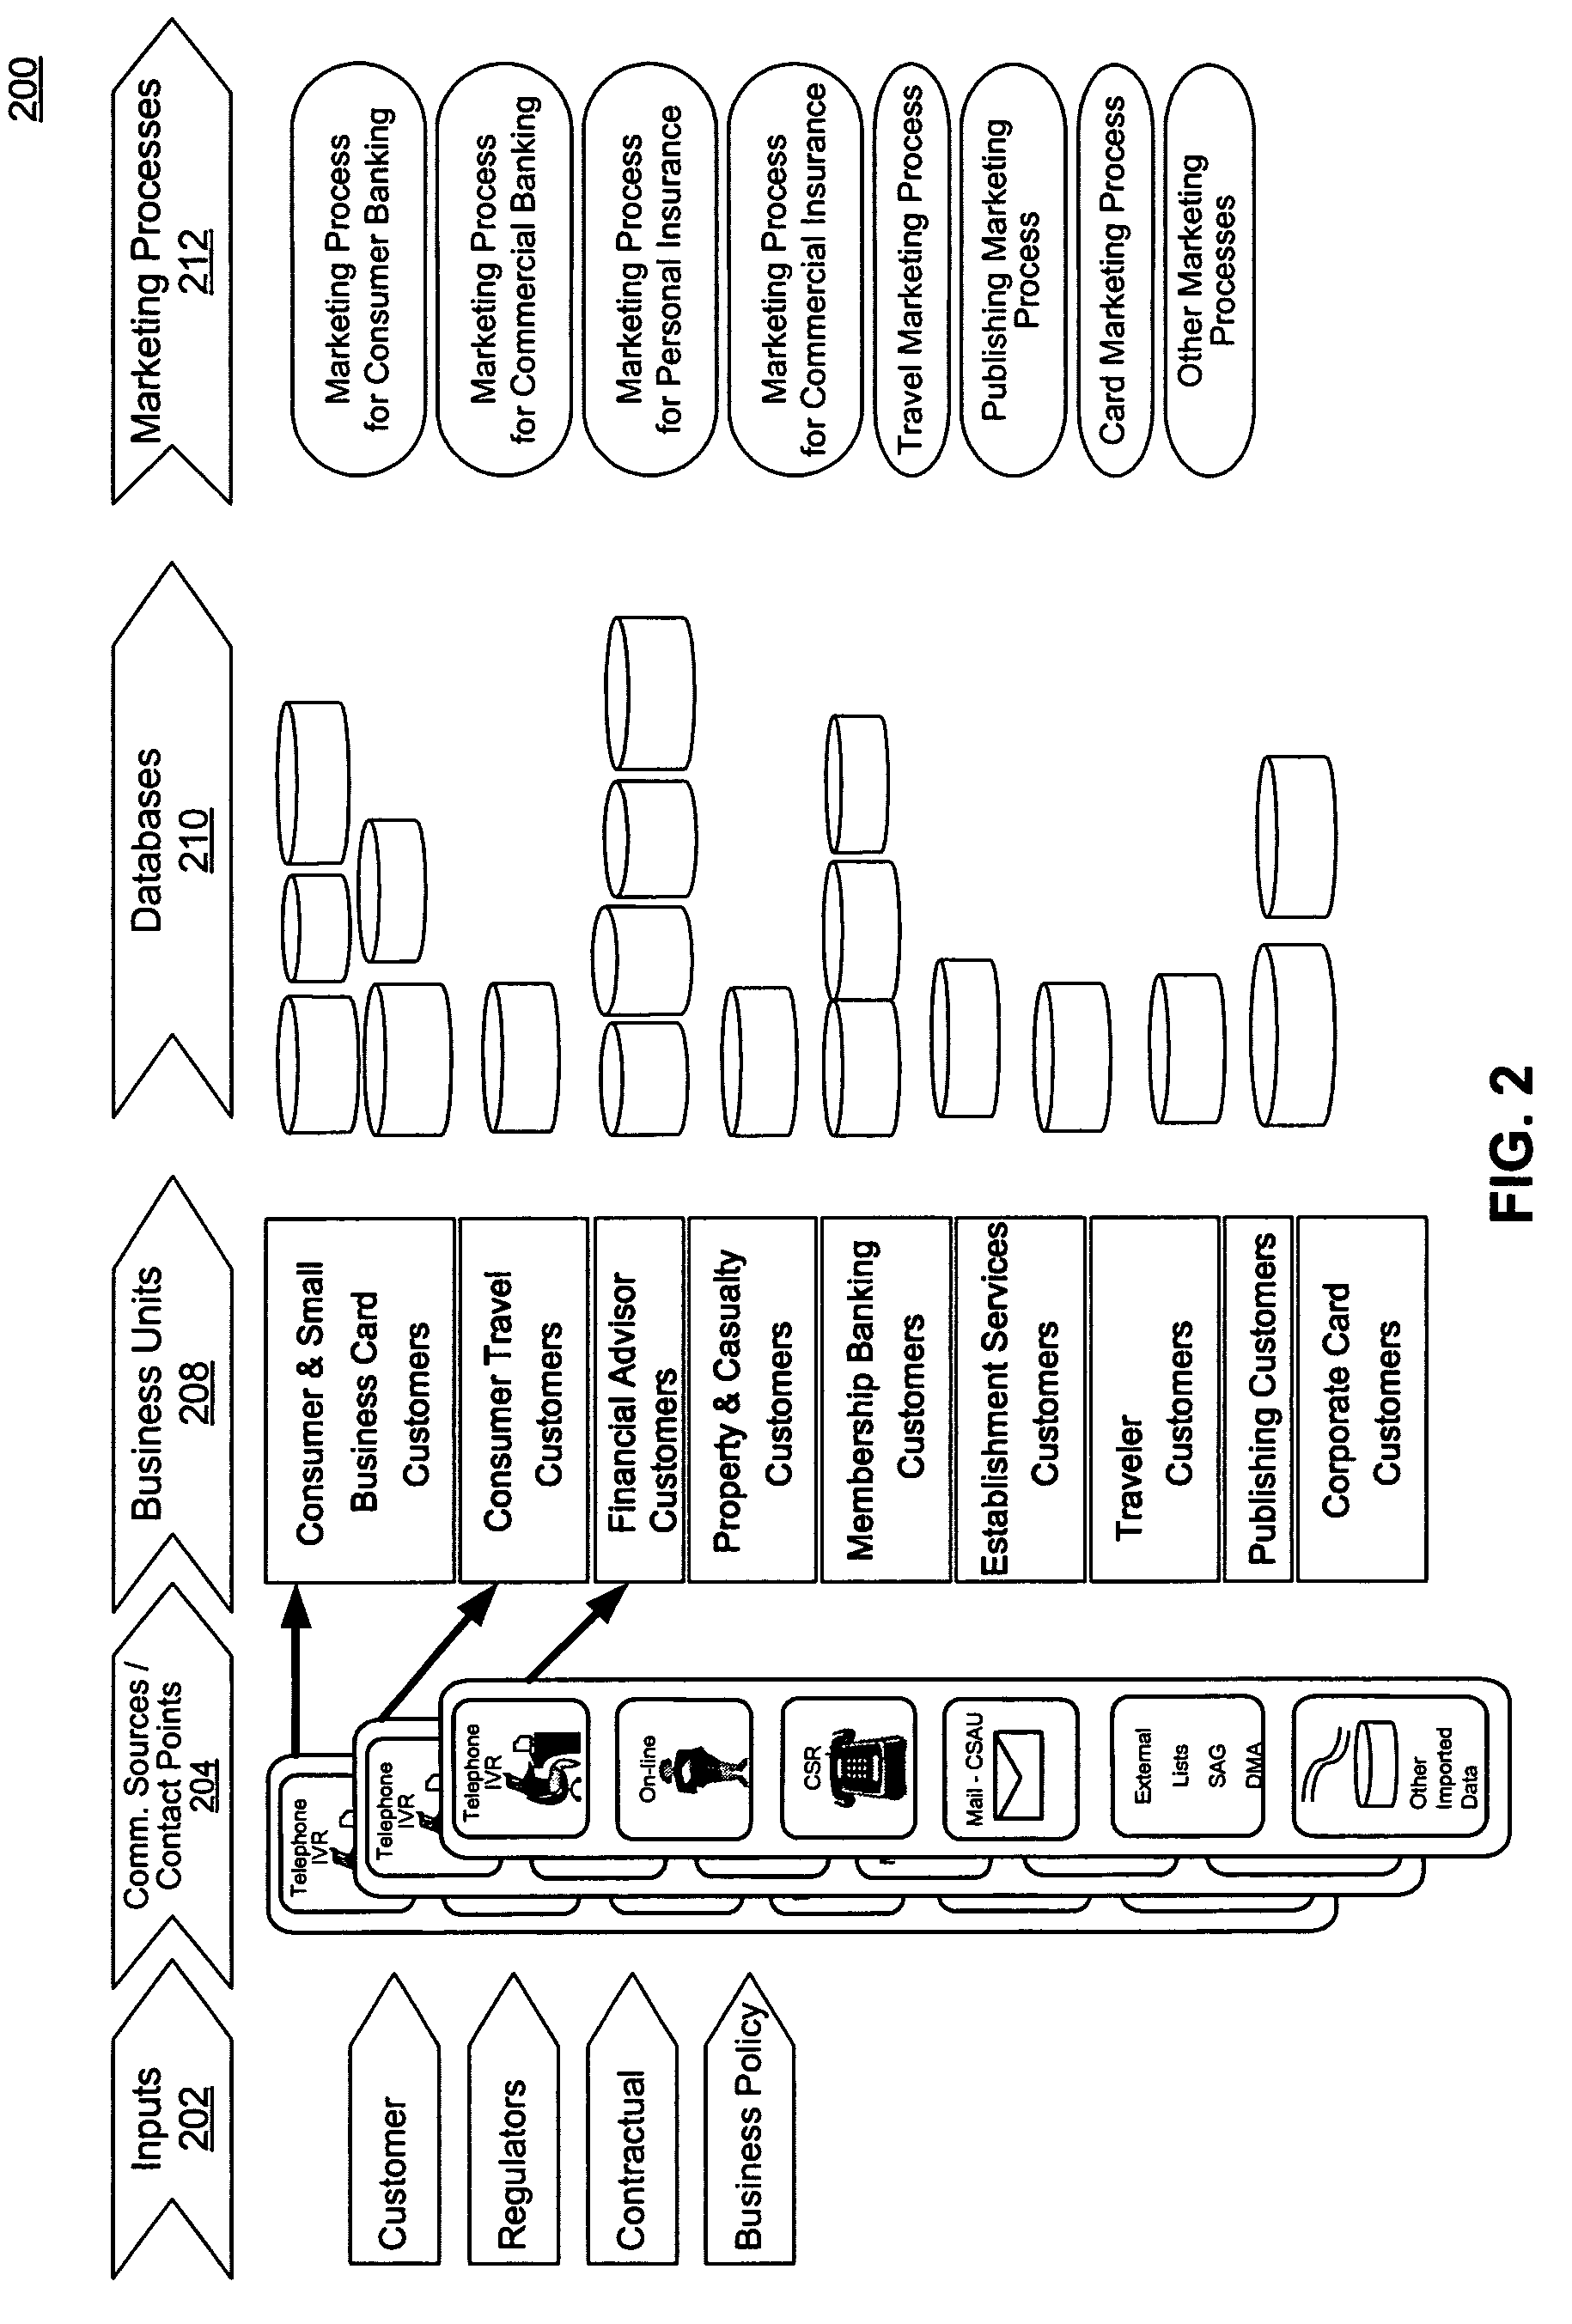 Method, system, and computer program product for honoring customer privacy and preferences